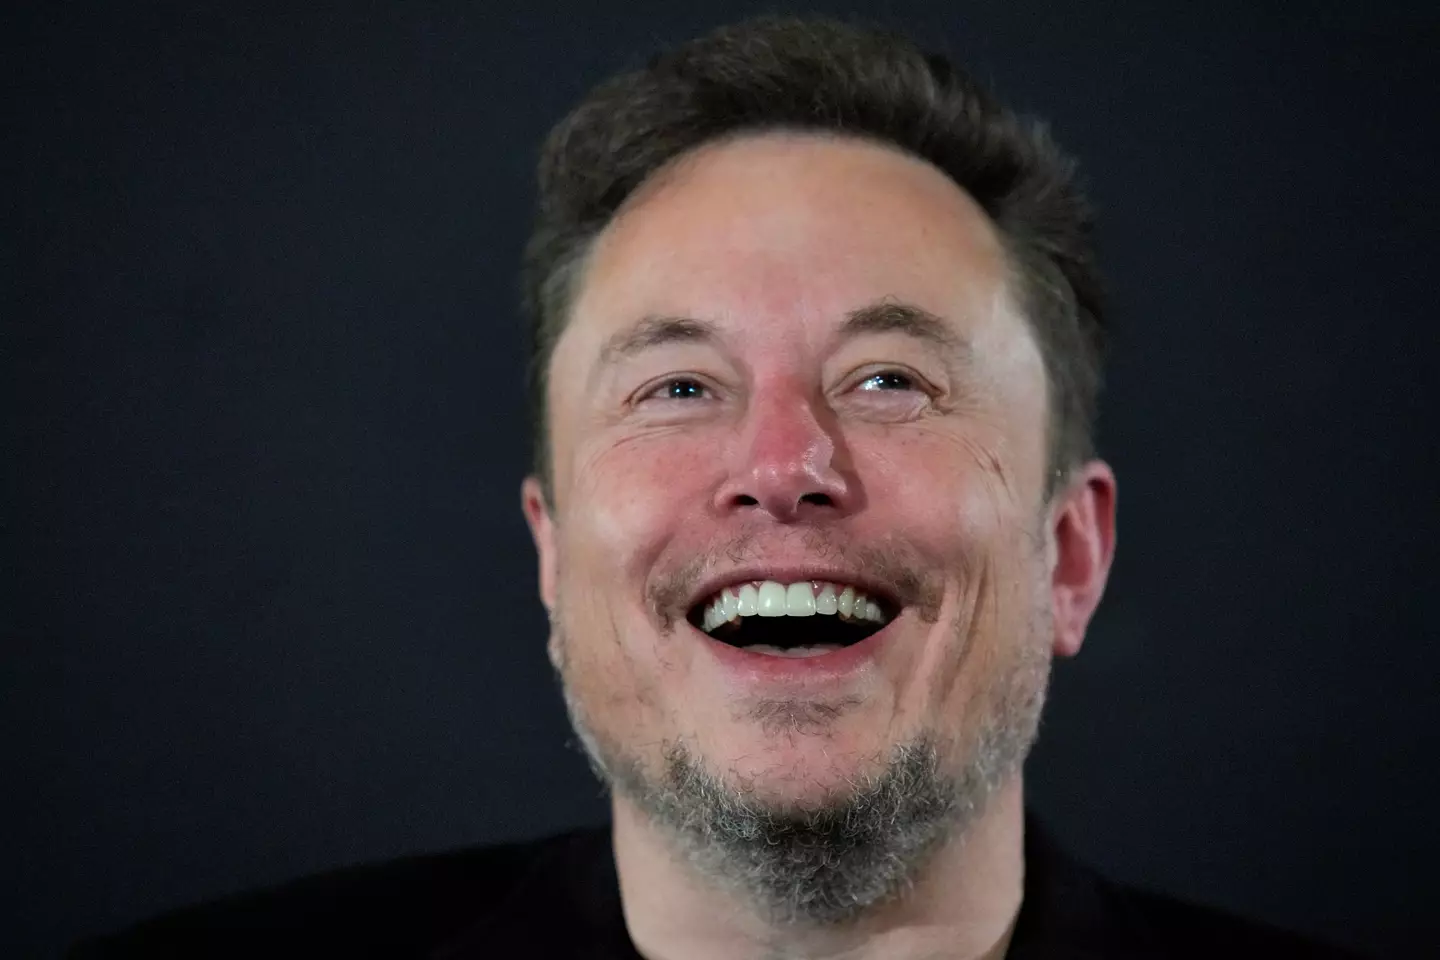 A new biopic on Elon Musk is coming.